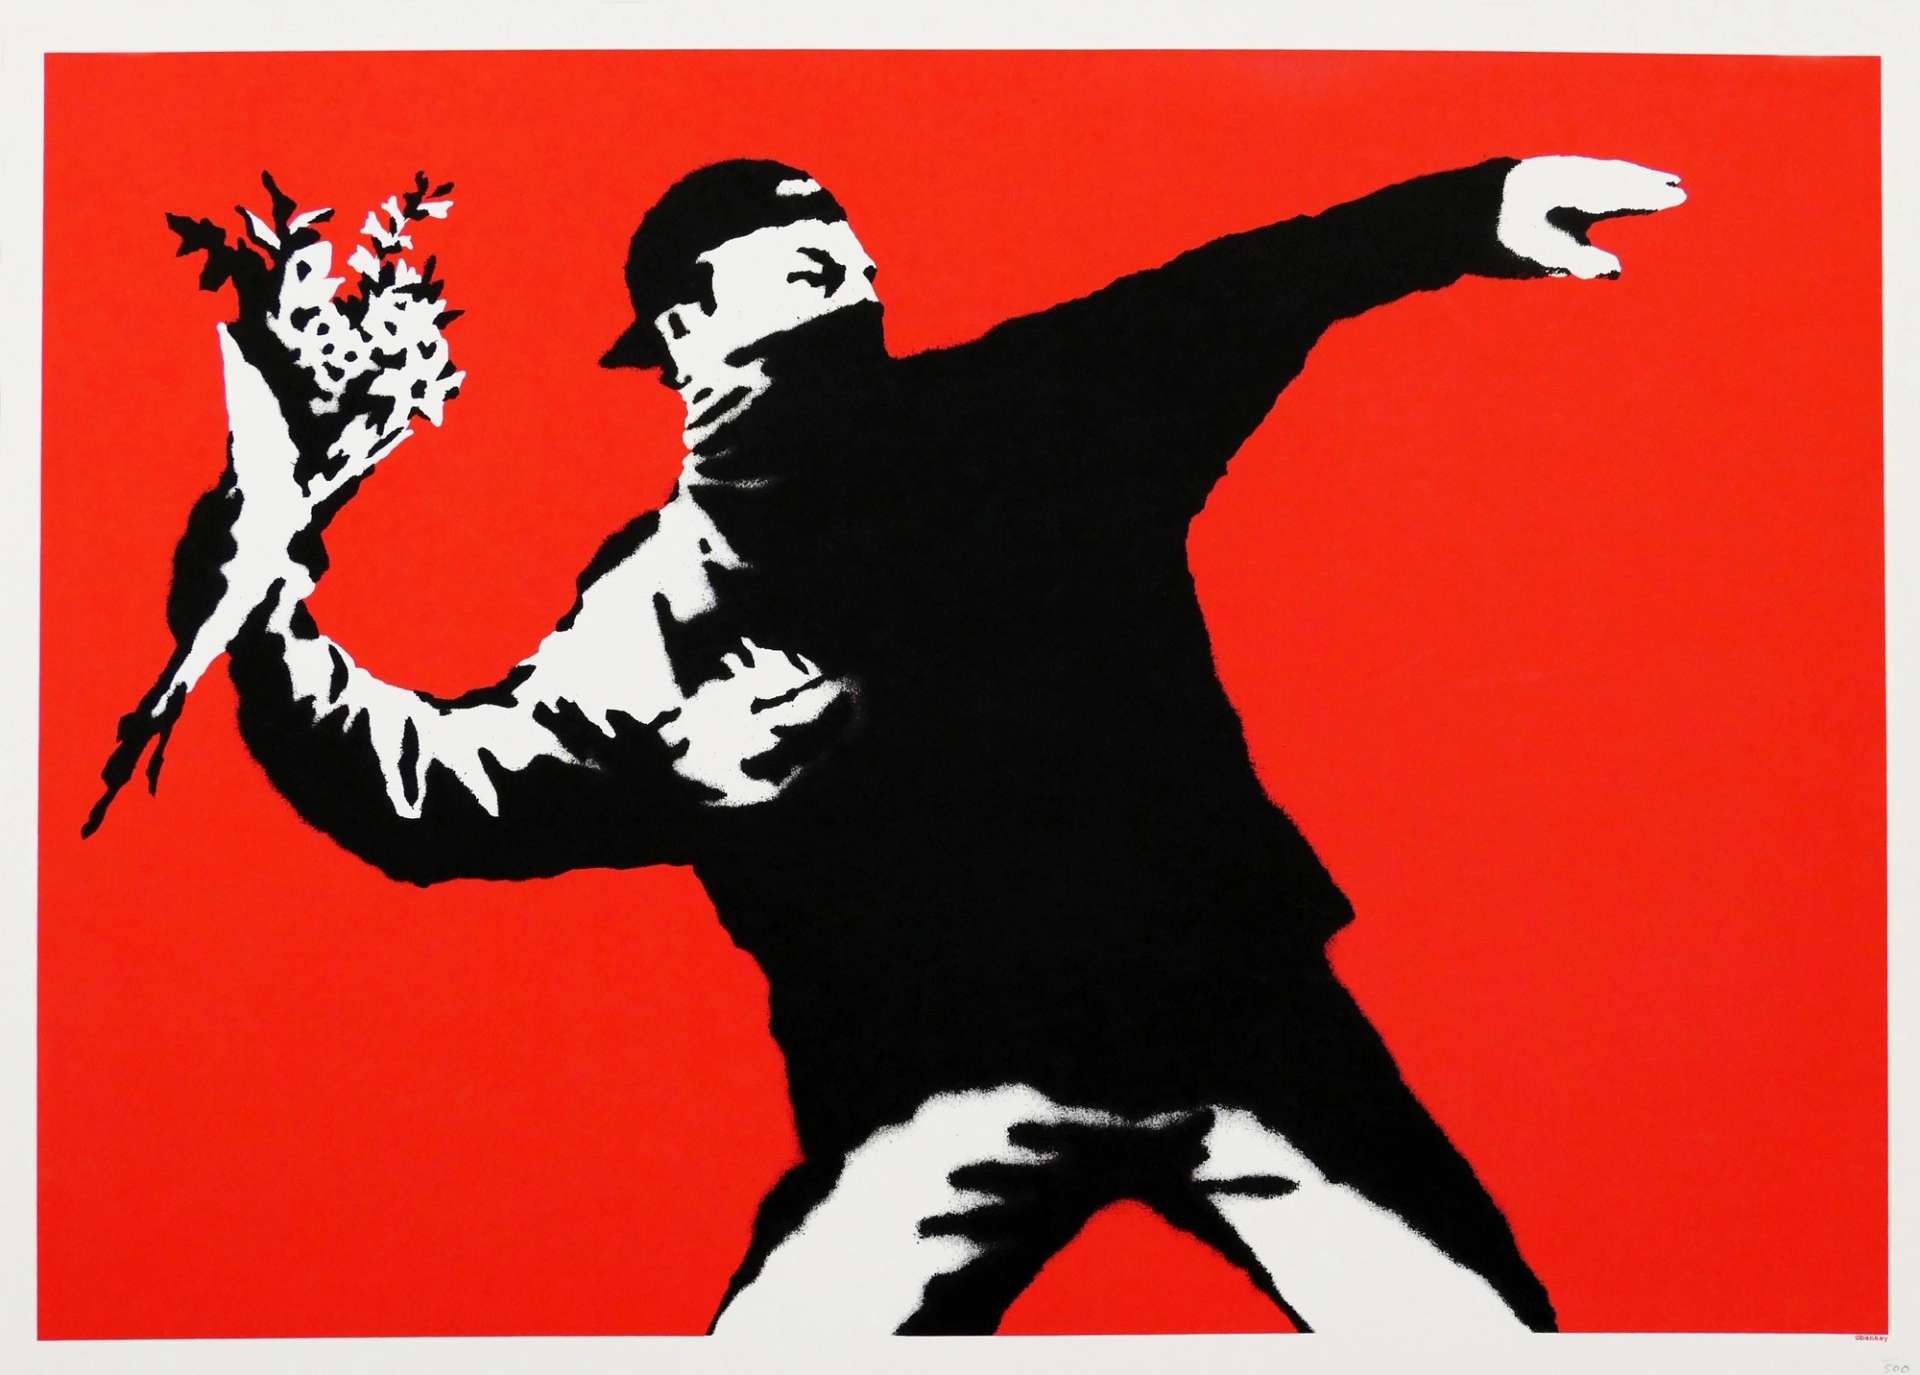 Love Is In The Air (Flower Thrower) by Banksy